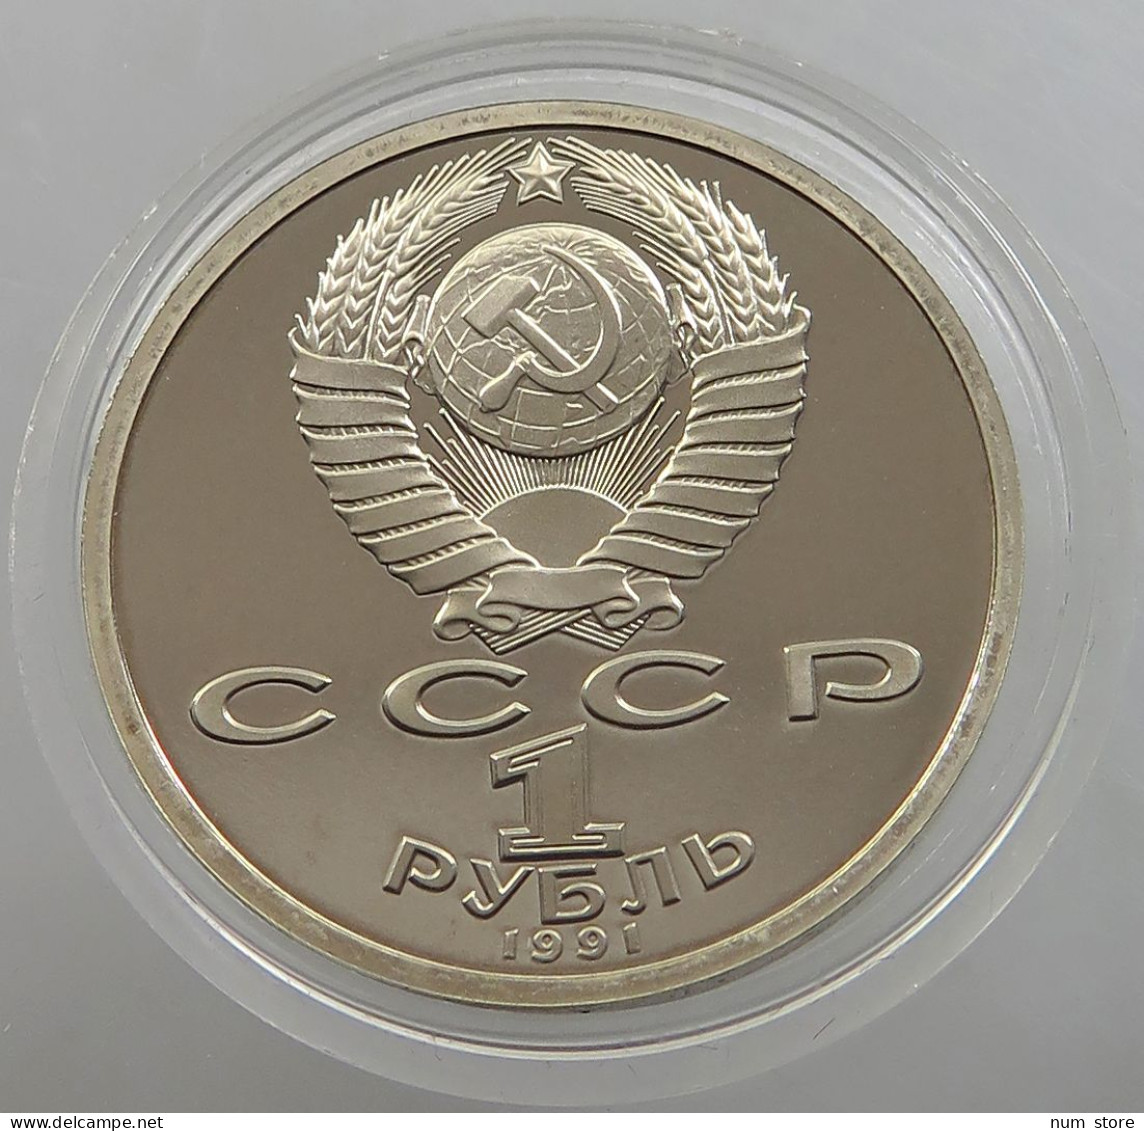 RUSSIA USSR 1 ROUBLE 1991 IVANOV PROOF #sm14 0505 - Rusland